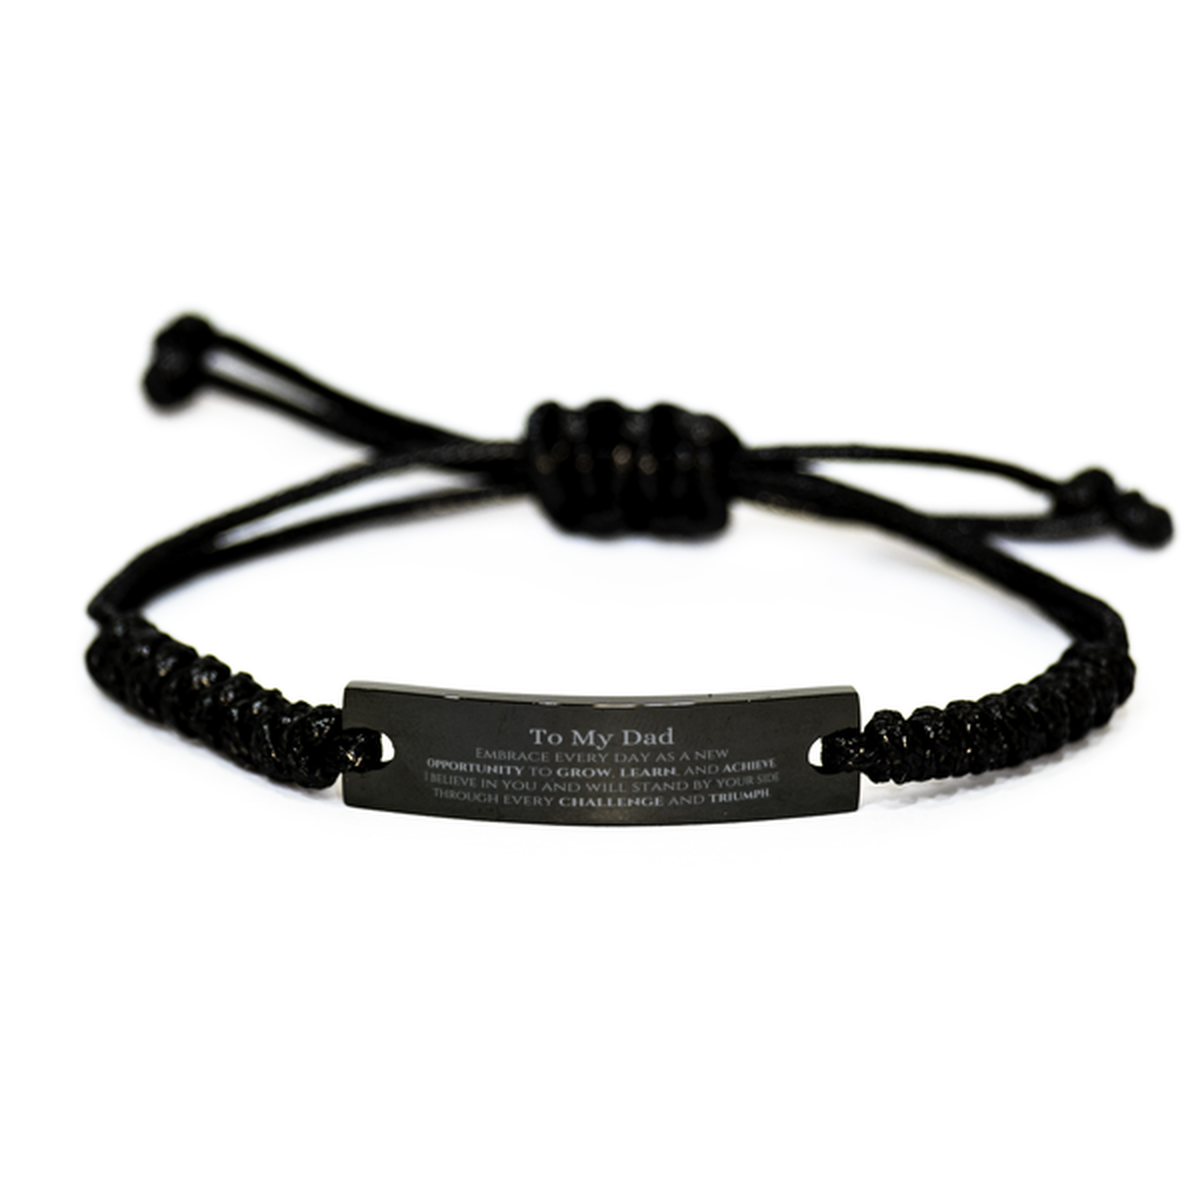 To My Dad Gifts, I believe in you and will stand by your side, Inspirational Black Rope Bracelet For Dad, Birthday Christmas Motivational Dad Gifts